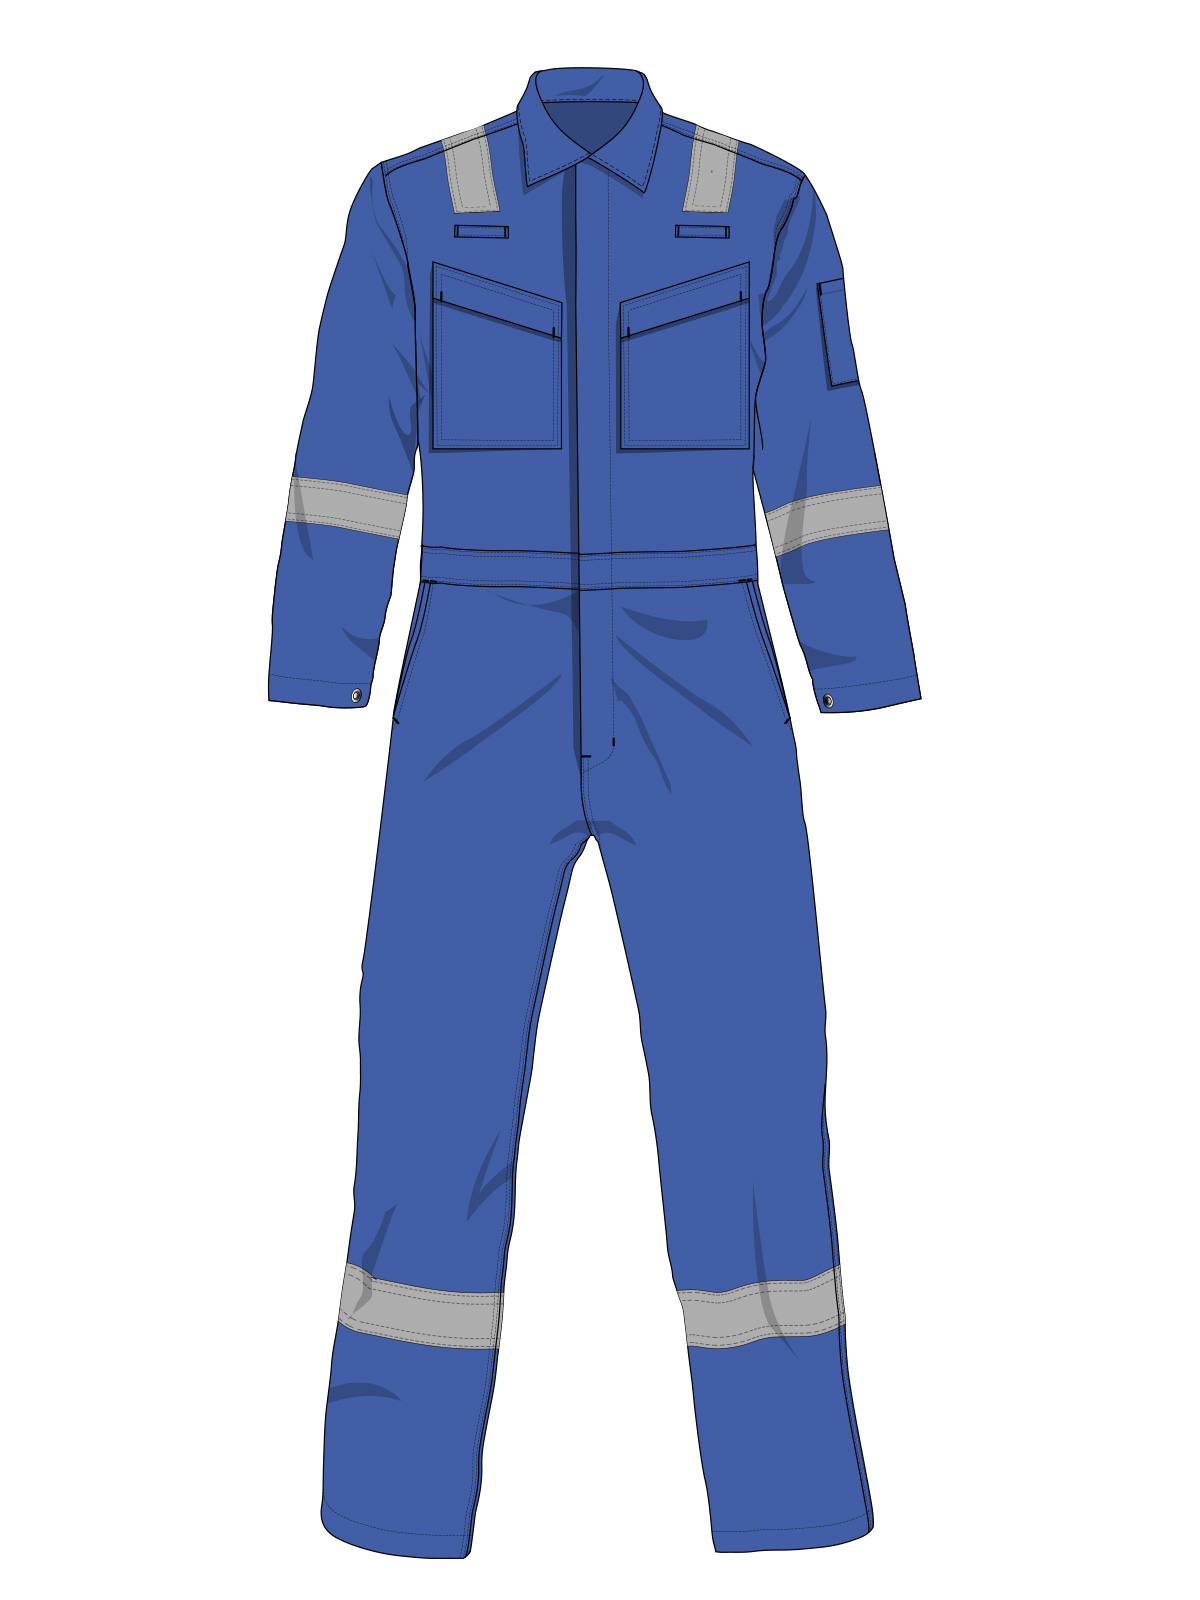 Rigger IFR Fire Resistant Coverall